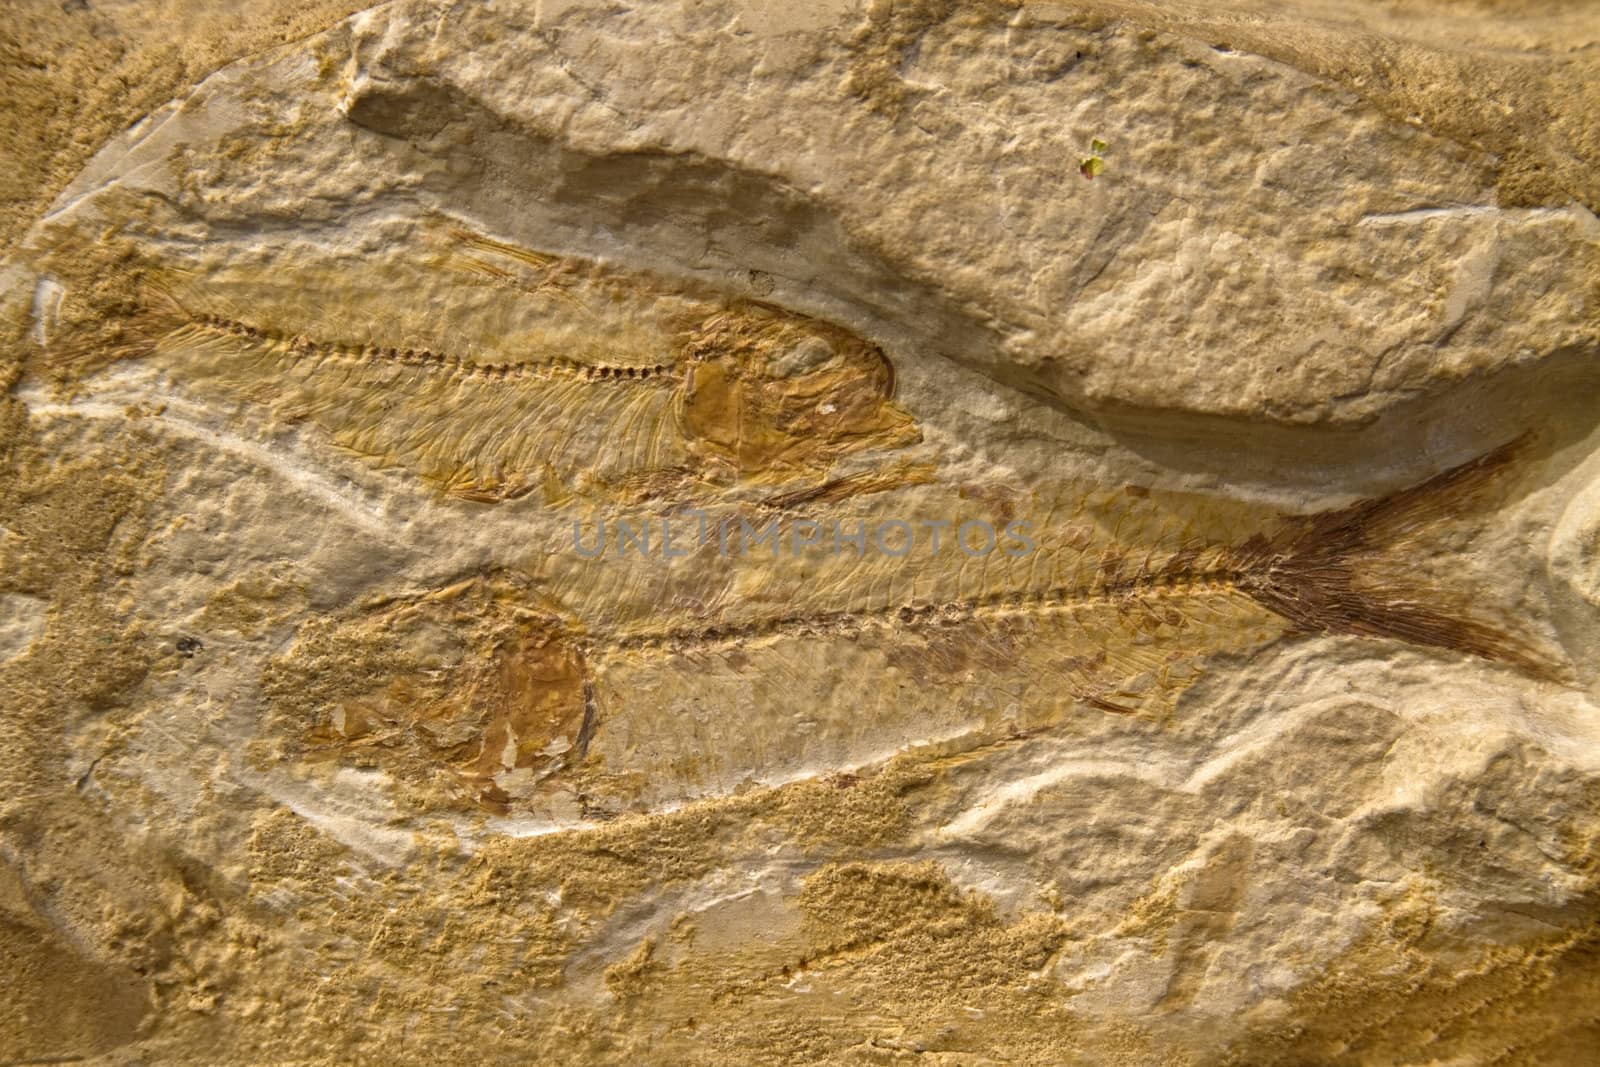 Fossilized Fish from Fossil Lake Area near Kemmerer, Wyoming USA. 